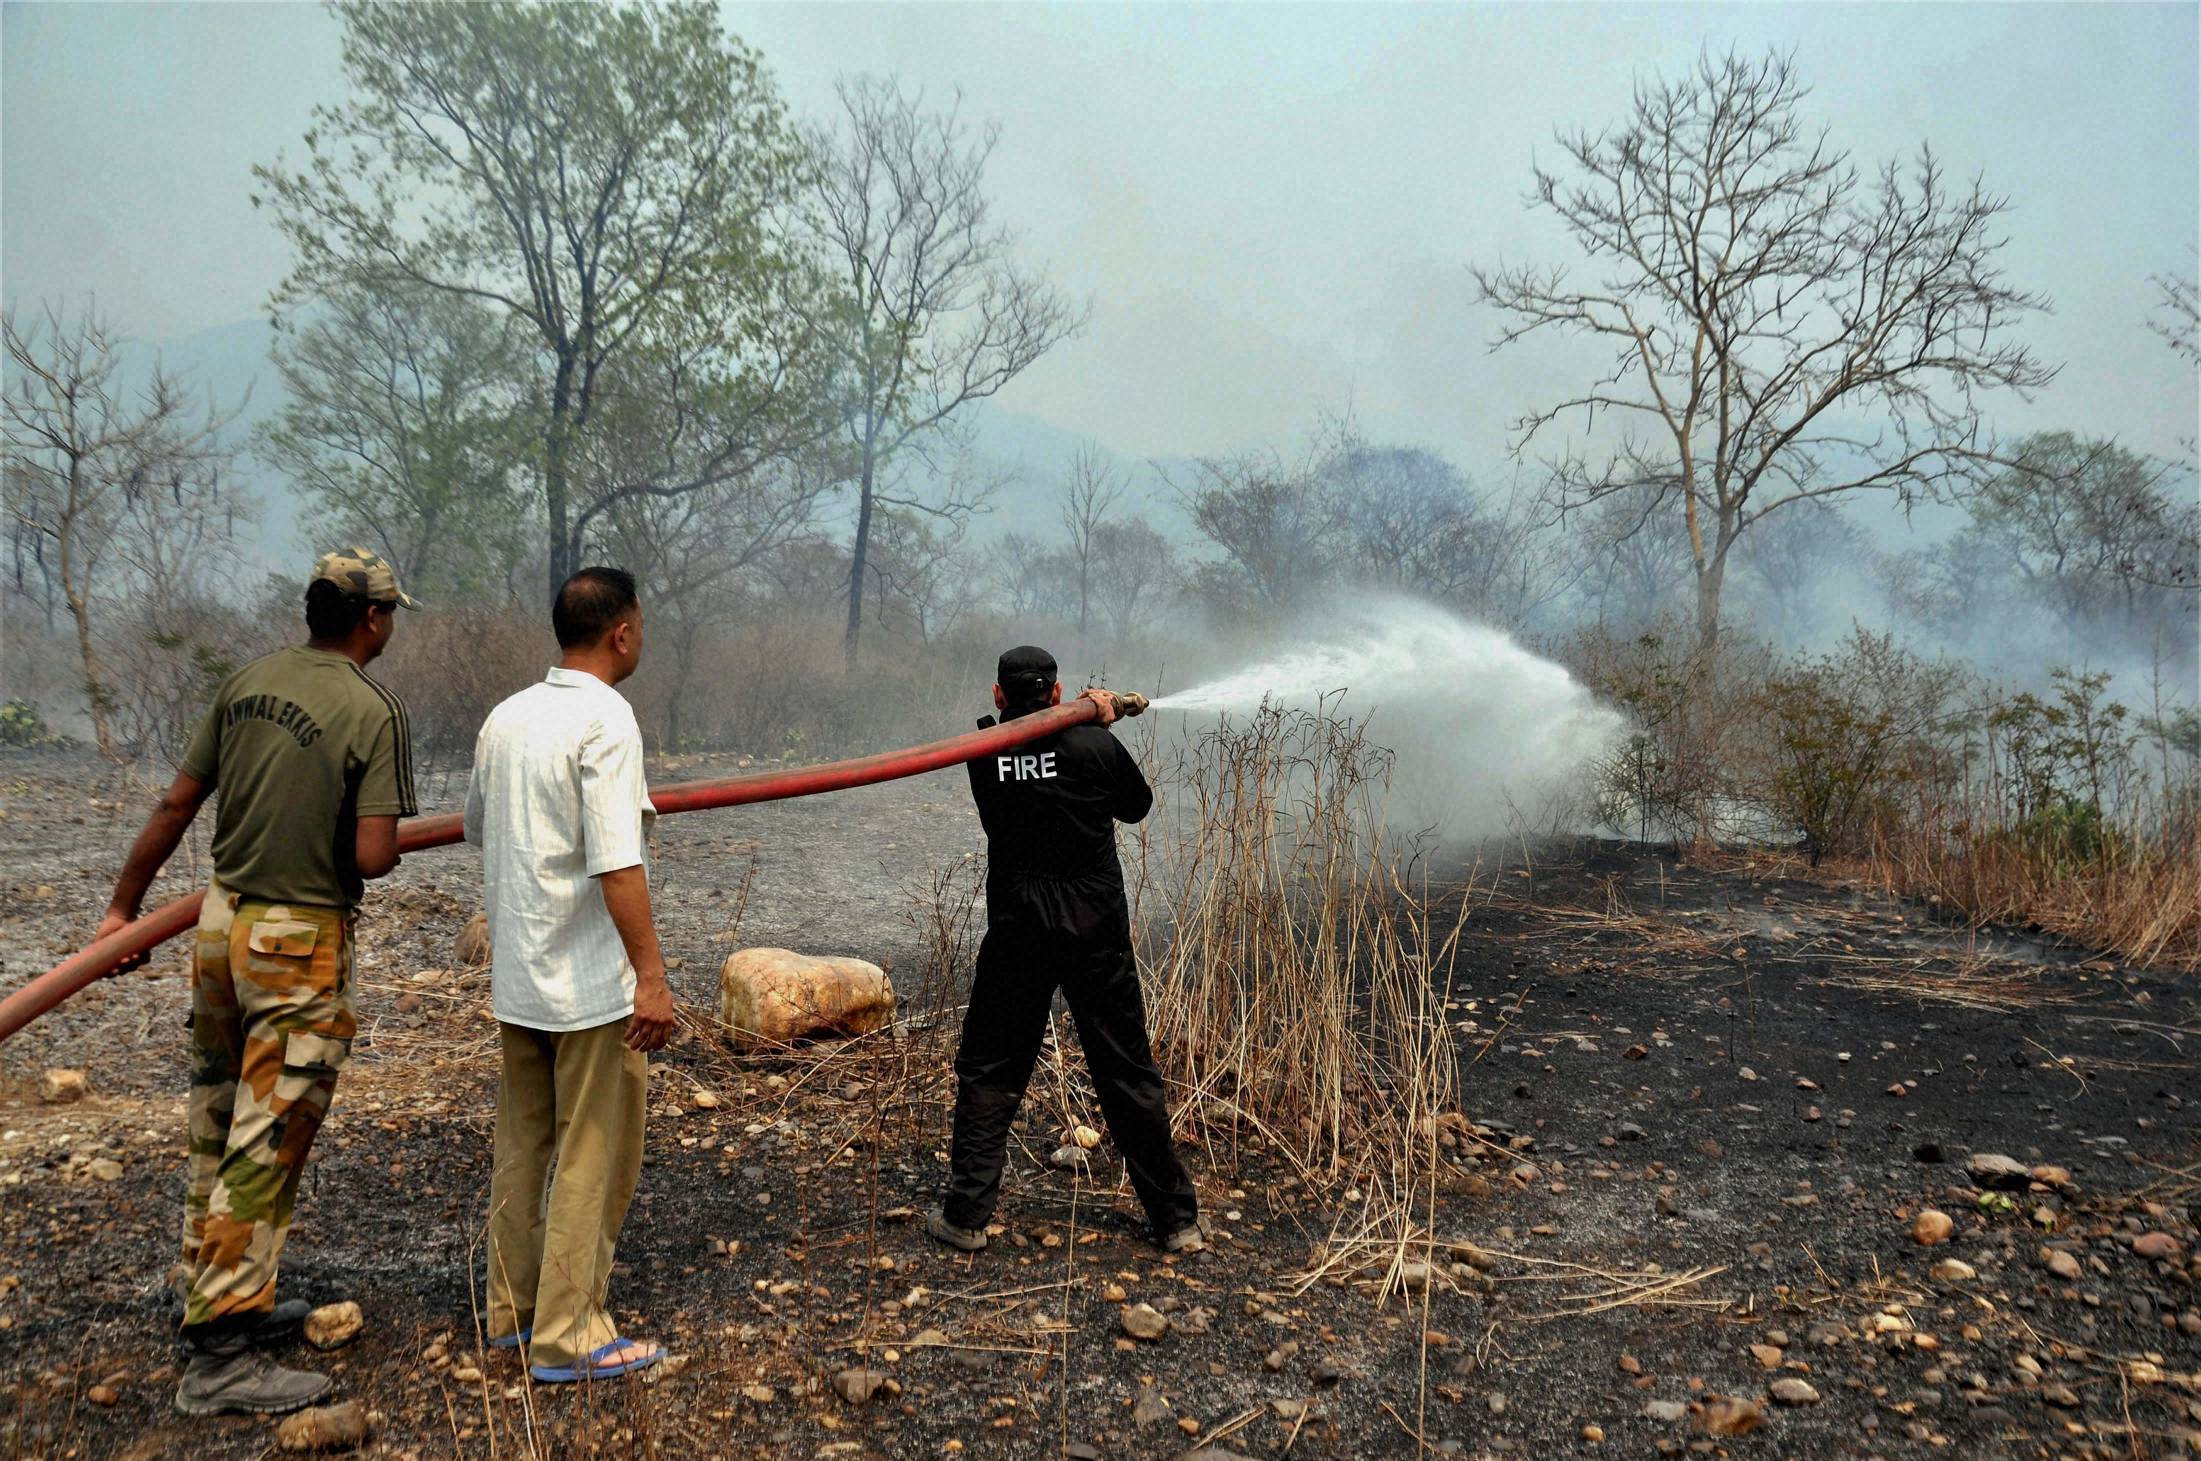 Widespread showers help contain forest fires in north Indian state of Uttarakhand